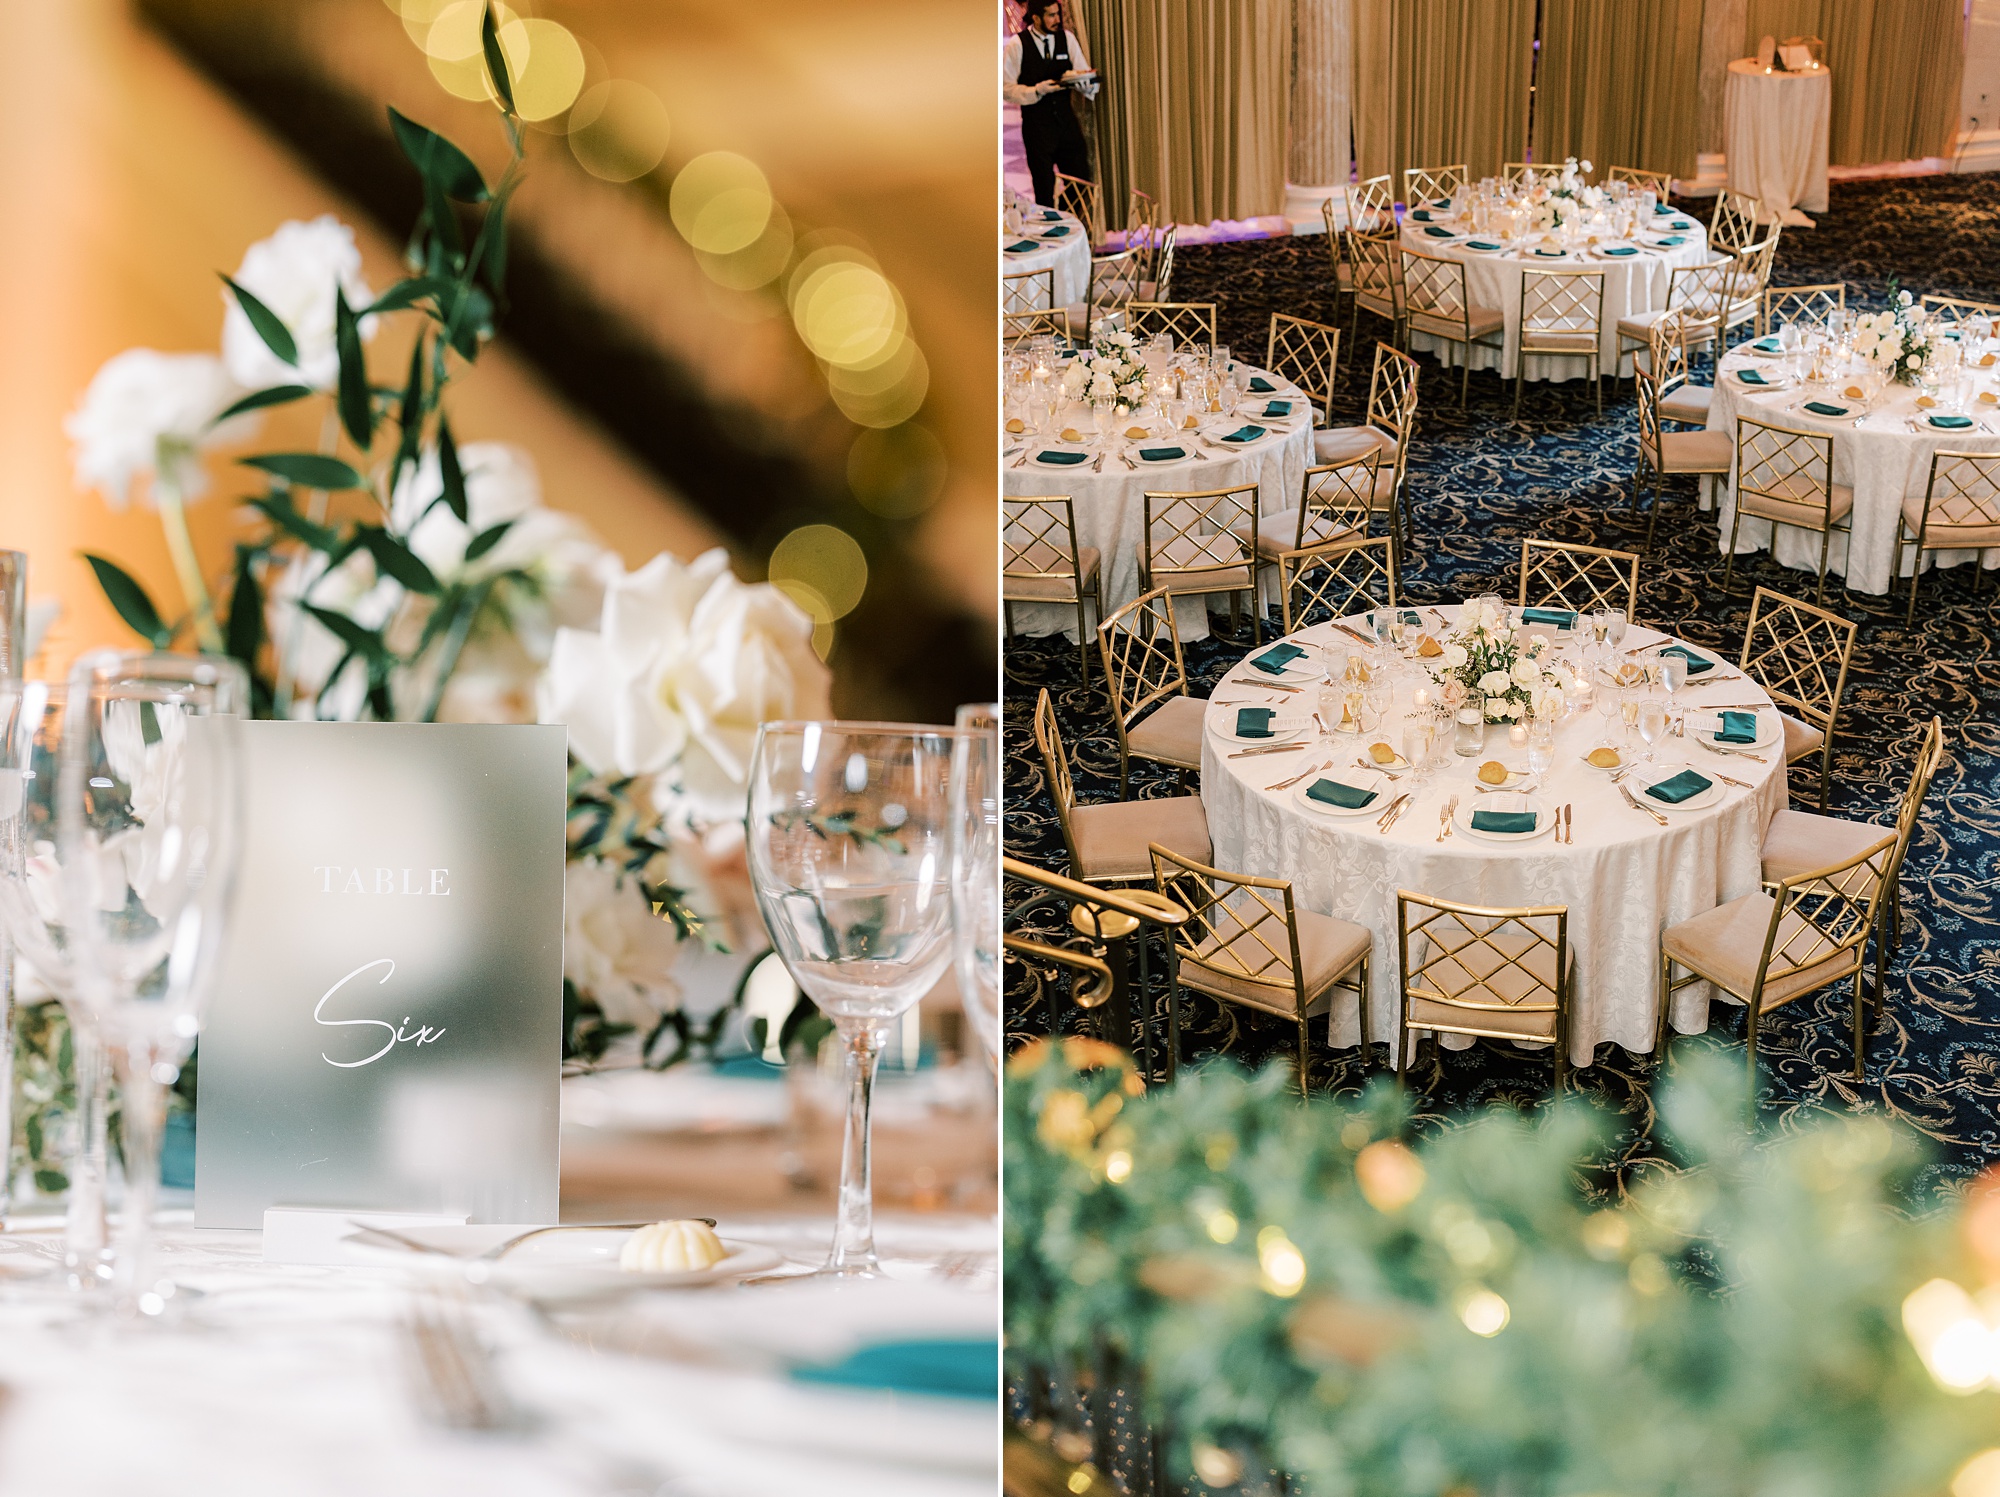 New Year's Eve with gold and green details at The Palace at Somerset Park